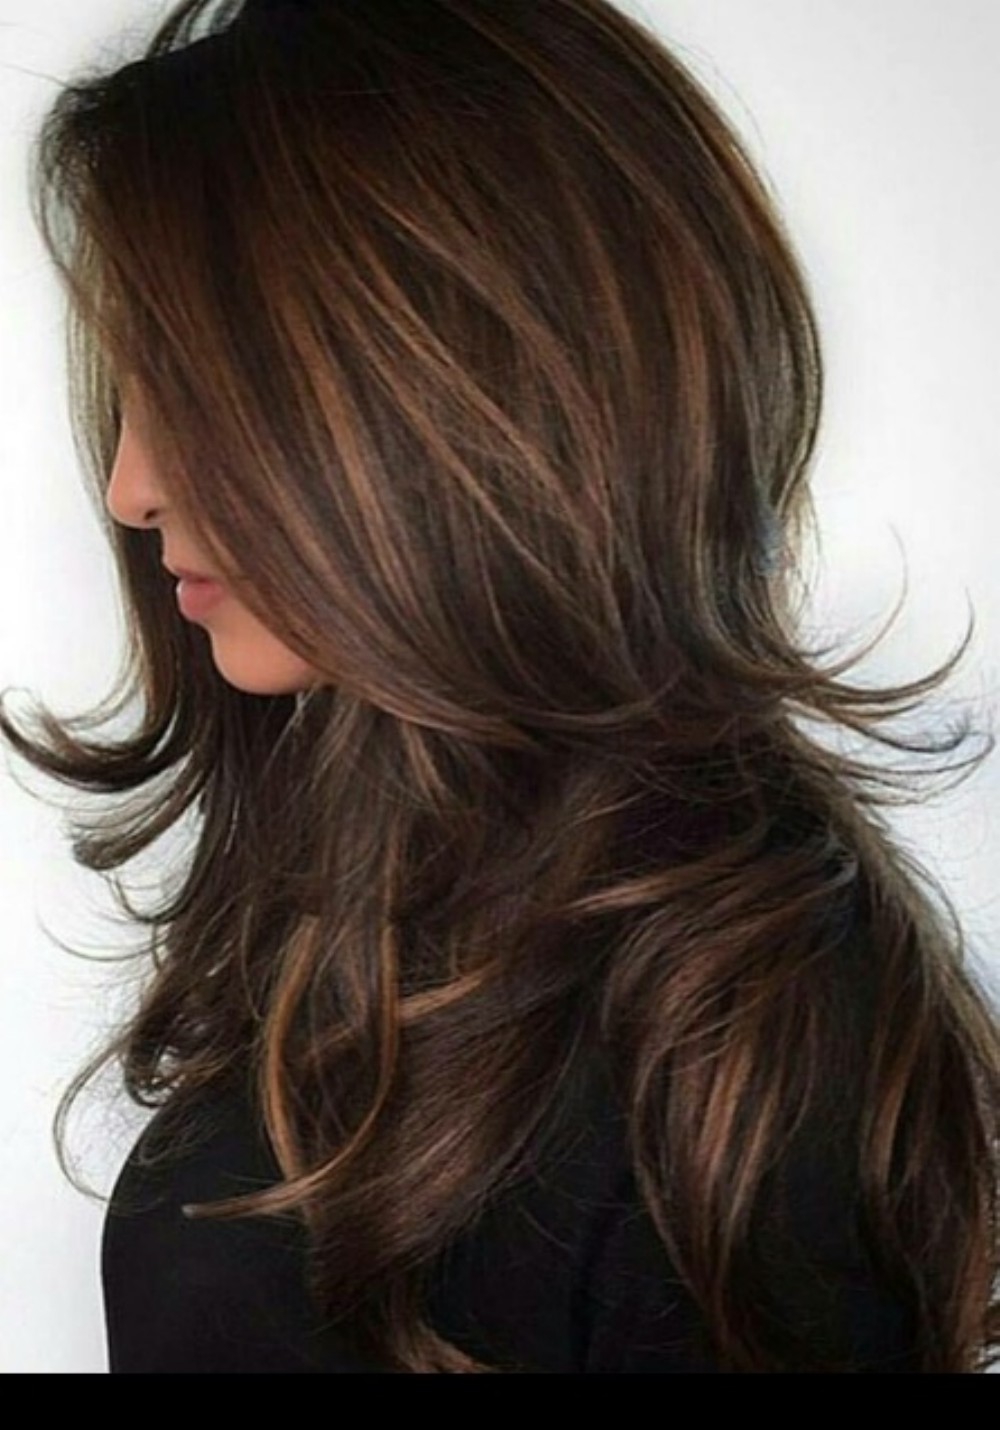 Best Layered Hairstyles for Women You Can Try This Year